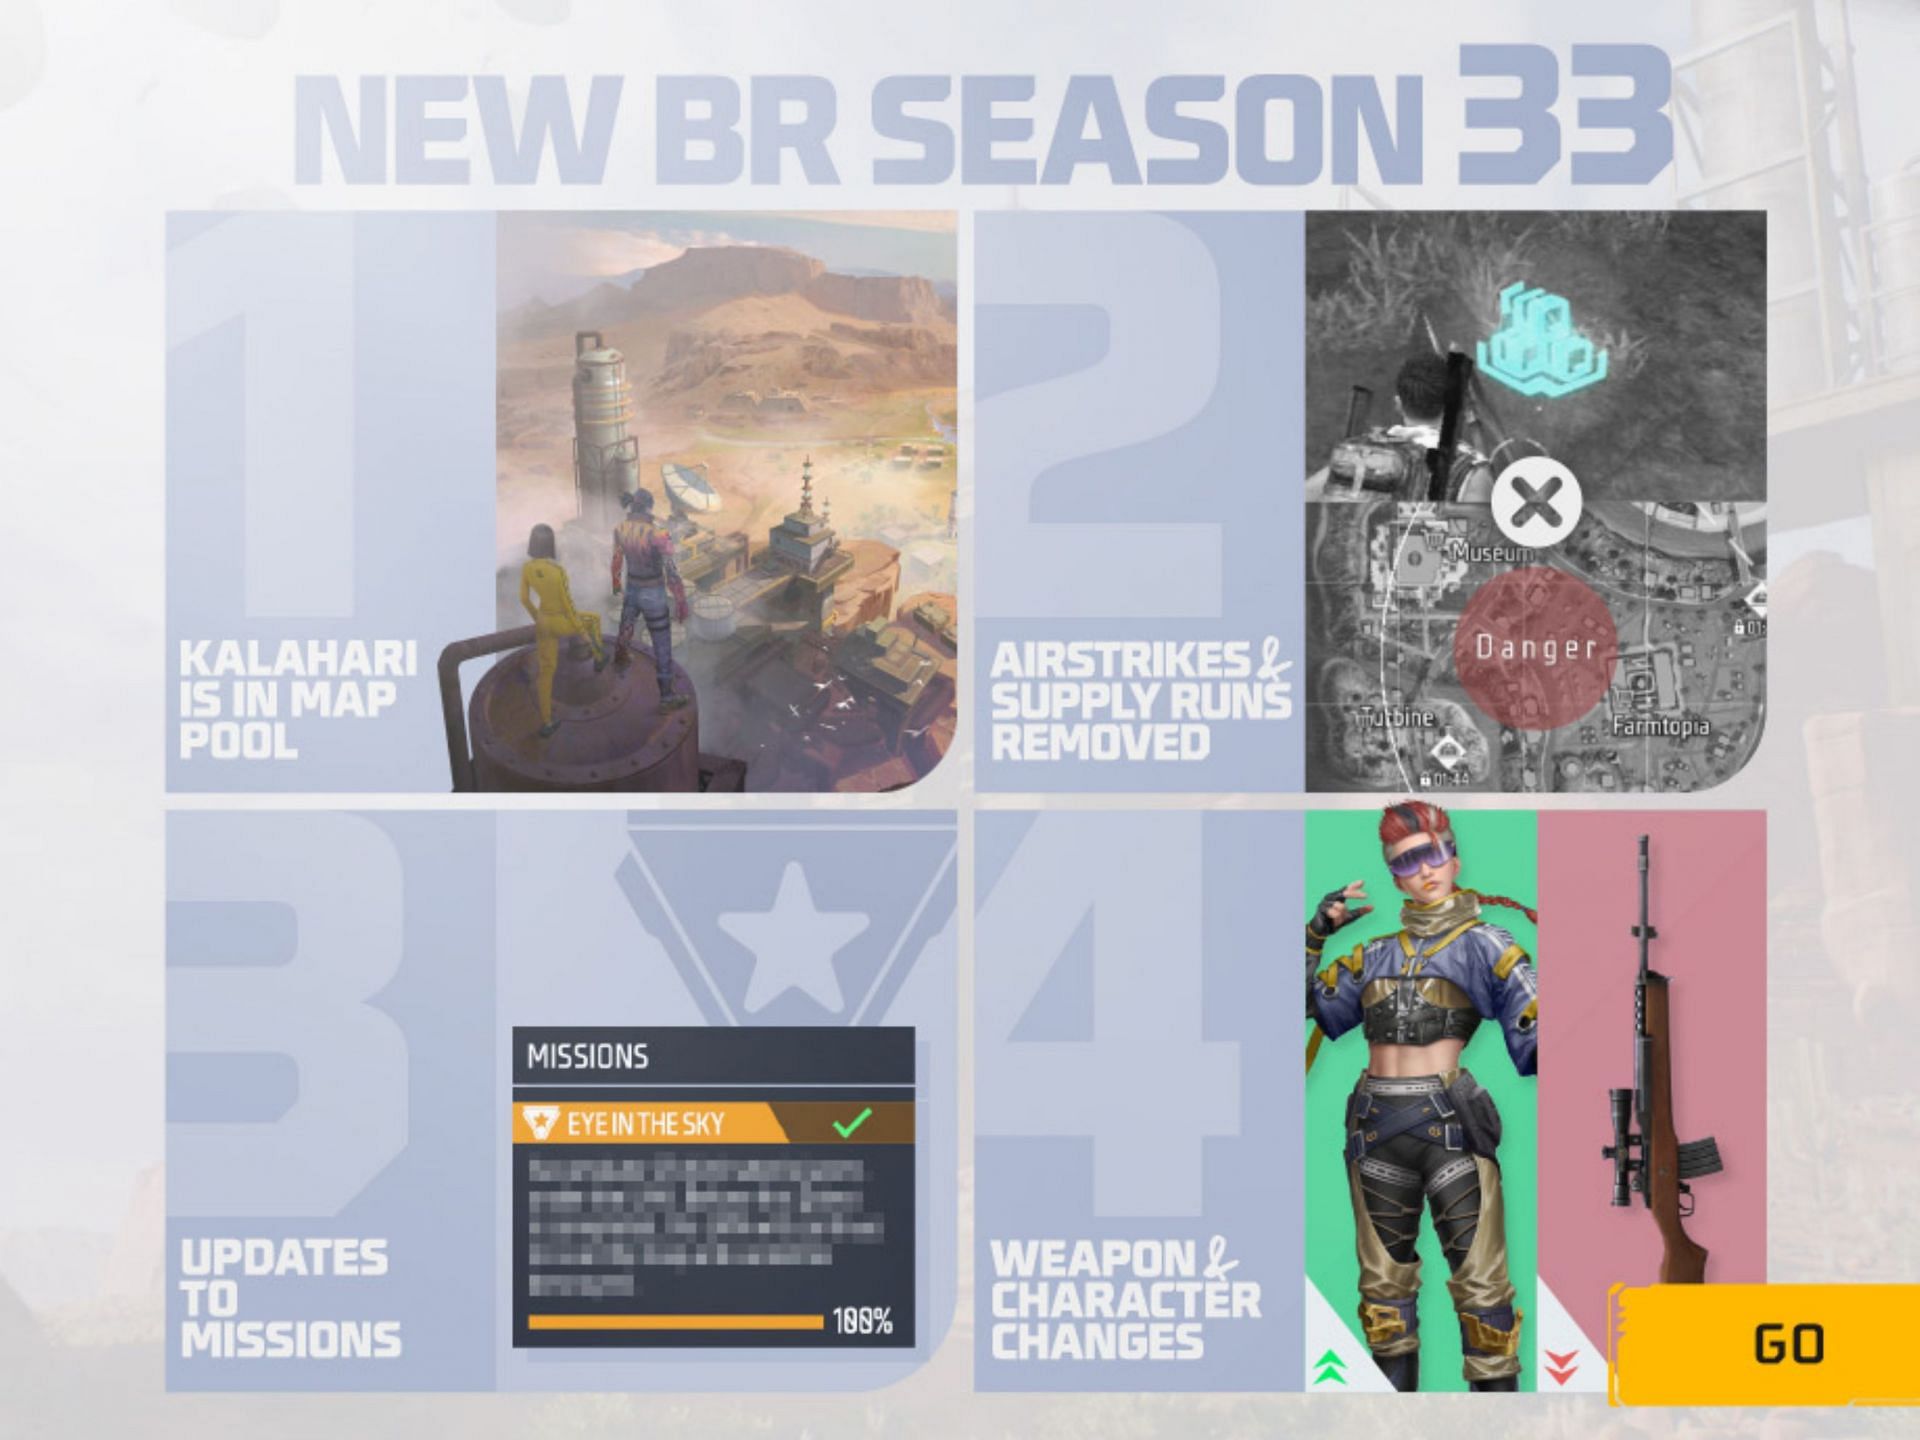 Free Fire MAX BR Ranked Season 33 has a number of changes (Image via Garena)